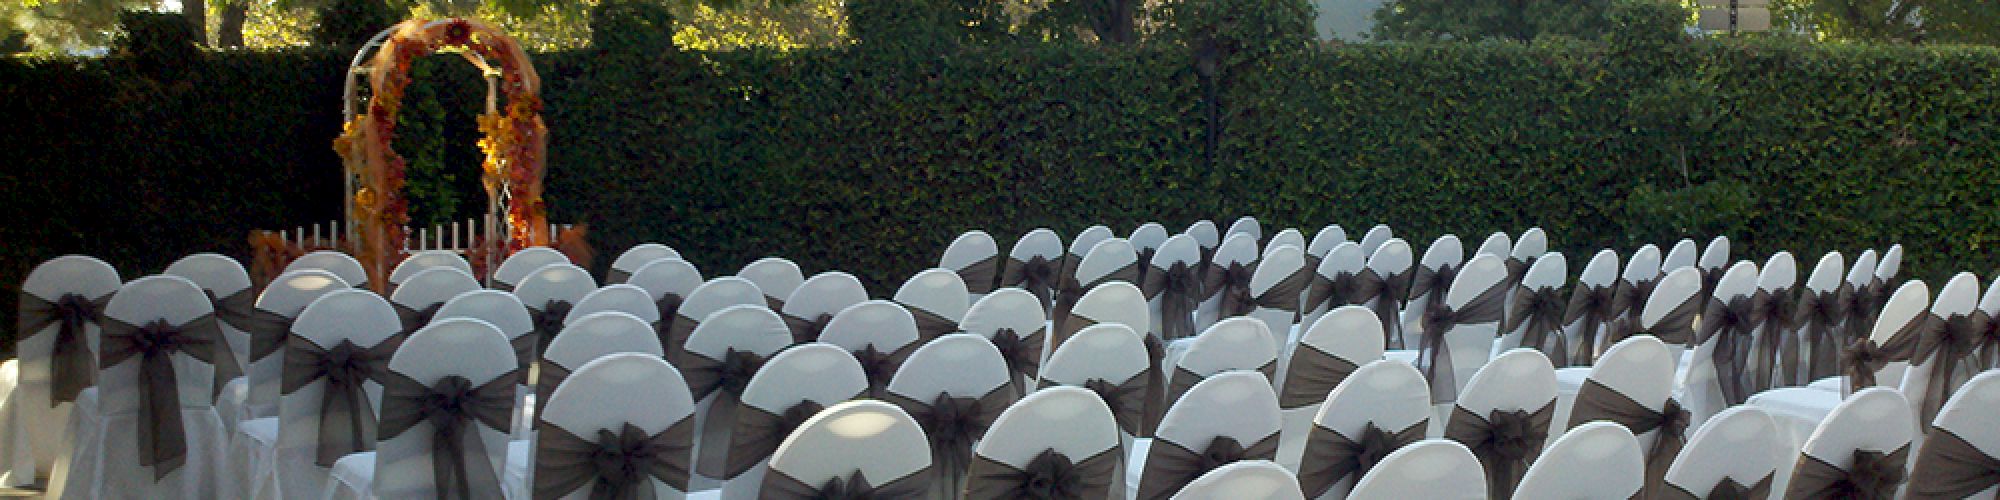 An outdoor event setup with rows of chairs adorned with white covers and dark bows, facing an arch decorated with flowers, surrounded by greenery.